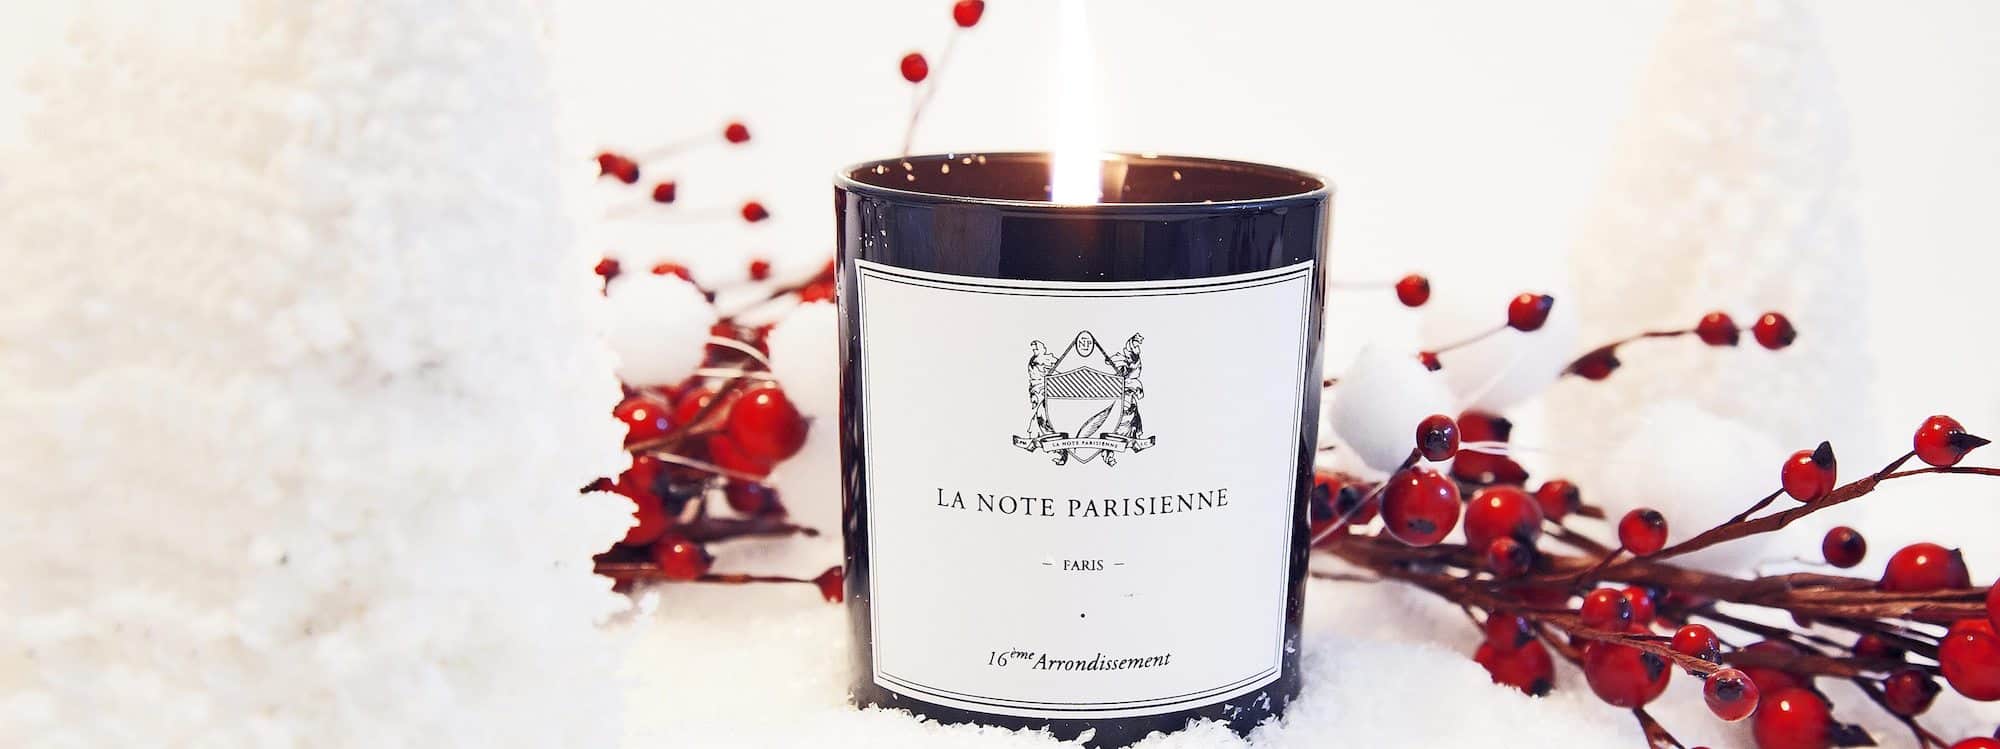 A lit candle from La Note Parisienne in a dark glass container with a black and white label. It is sat within a snowy, white Christmas setting with red berry sprays just behind it. 